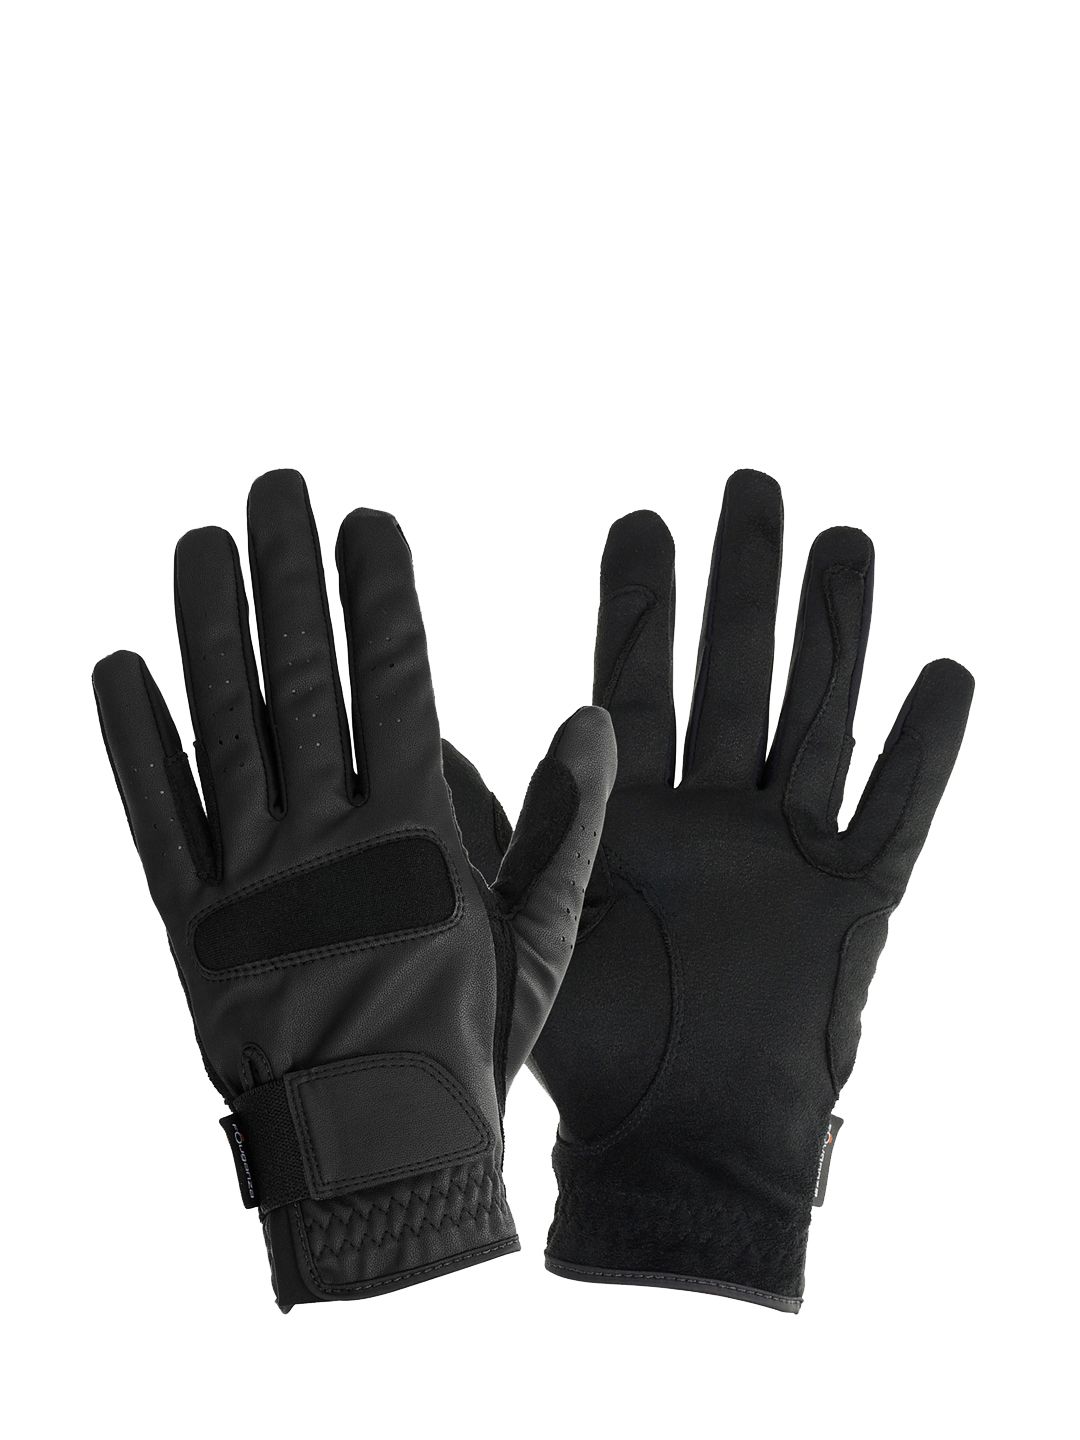 FOUGANZA By Decathlon Women Black Horse Riding Grippy Gloves Price in India